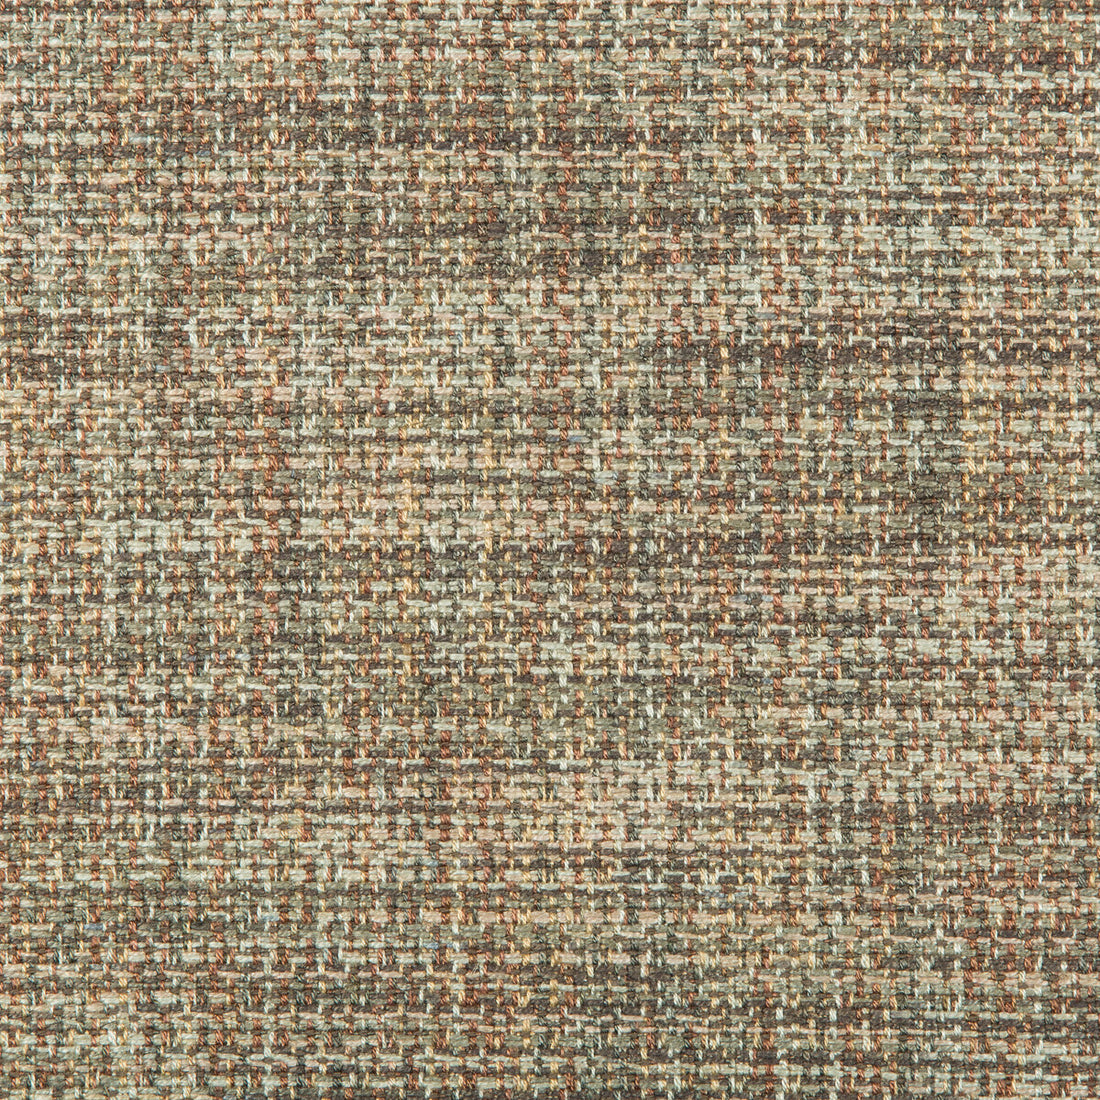 Ladera fabric in chia color - pattern 35523.2411.0 - by Kravet Design in the Barclay Butera Sagamore collection